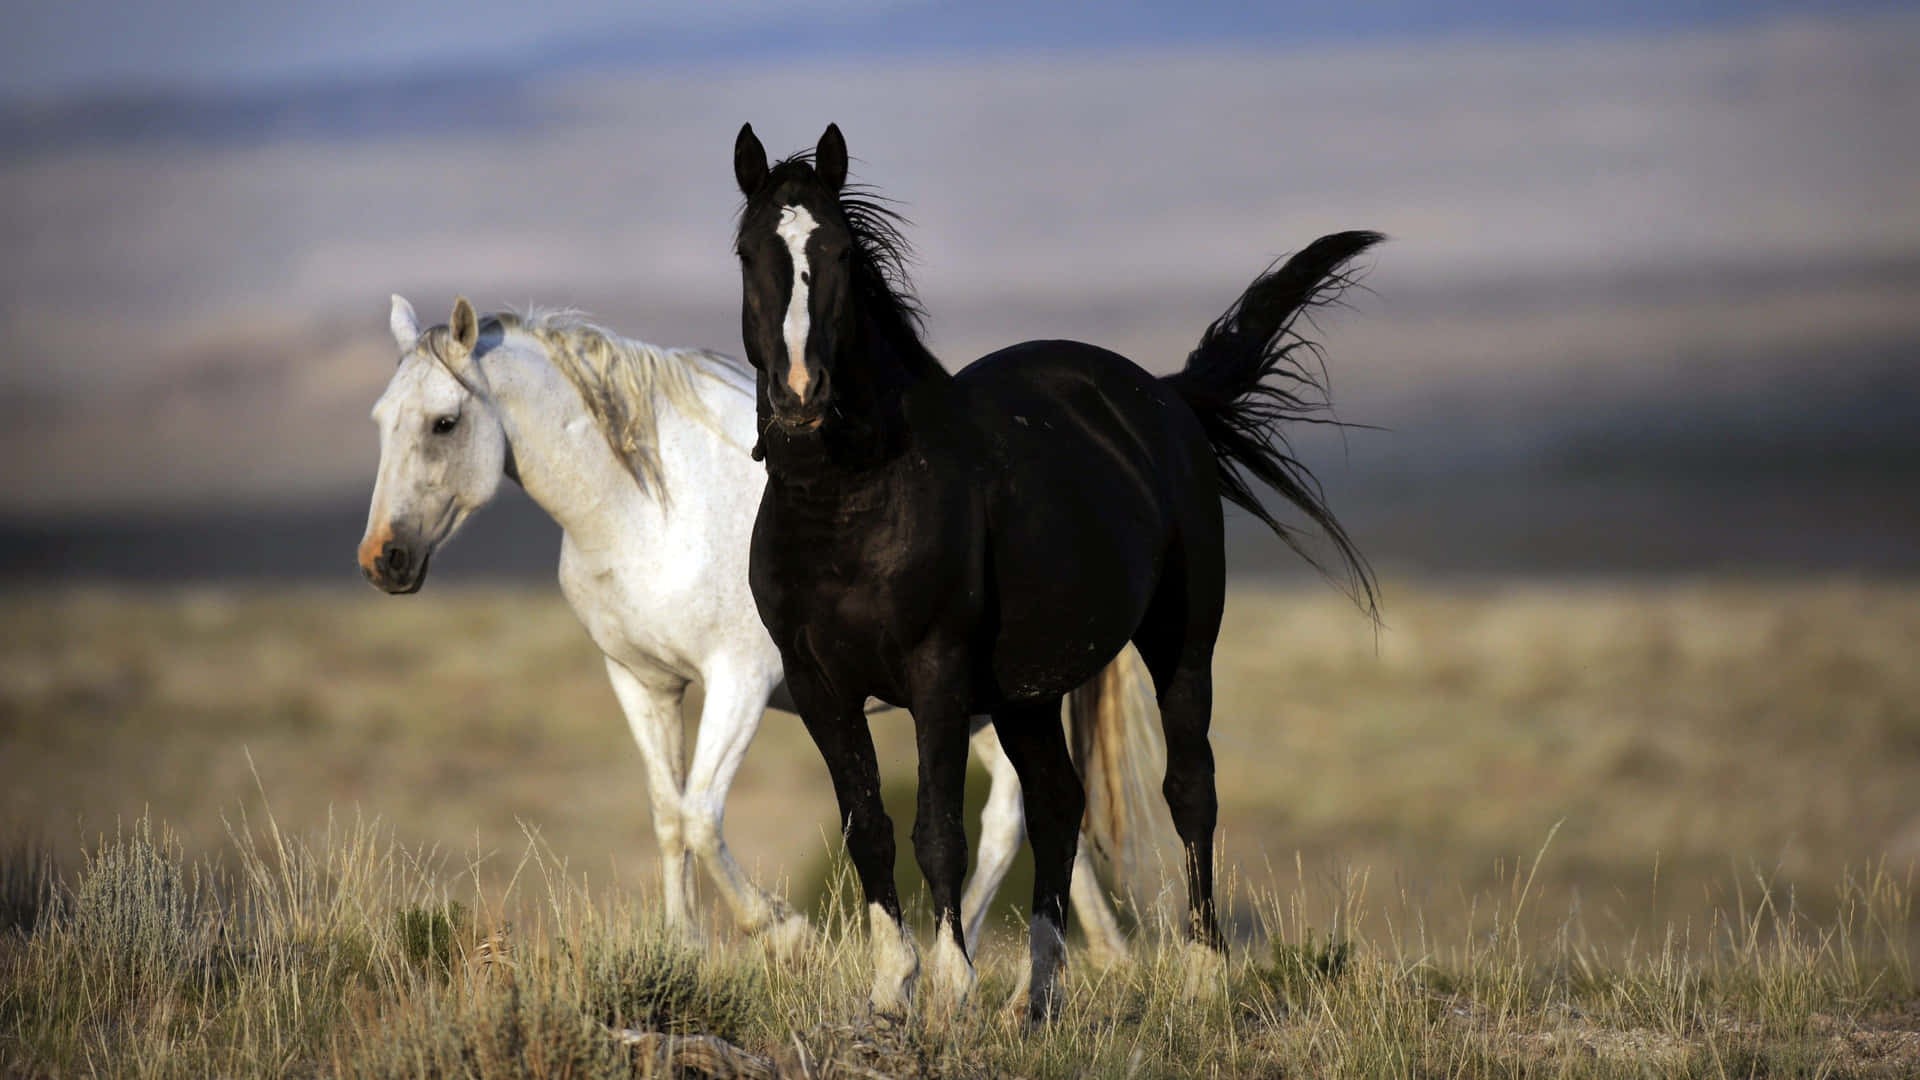 Black And White Horse Running Together Picture